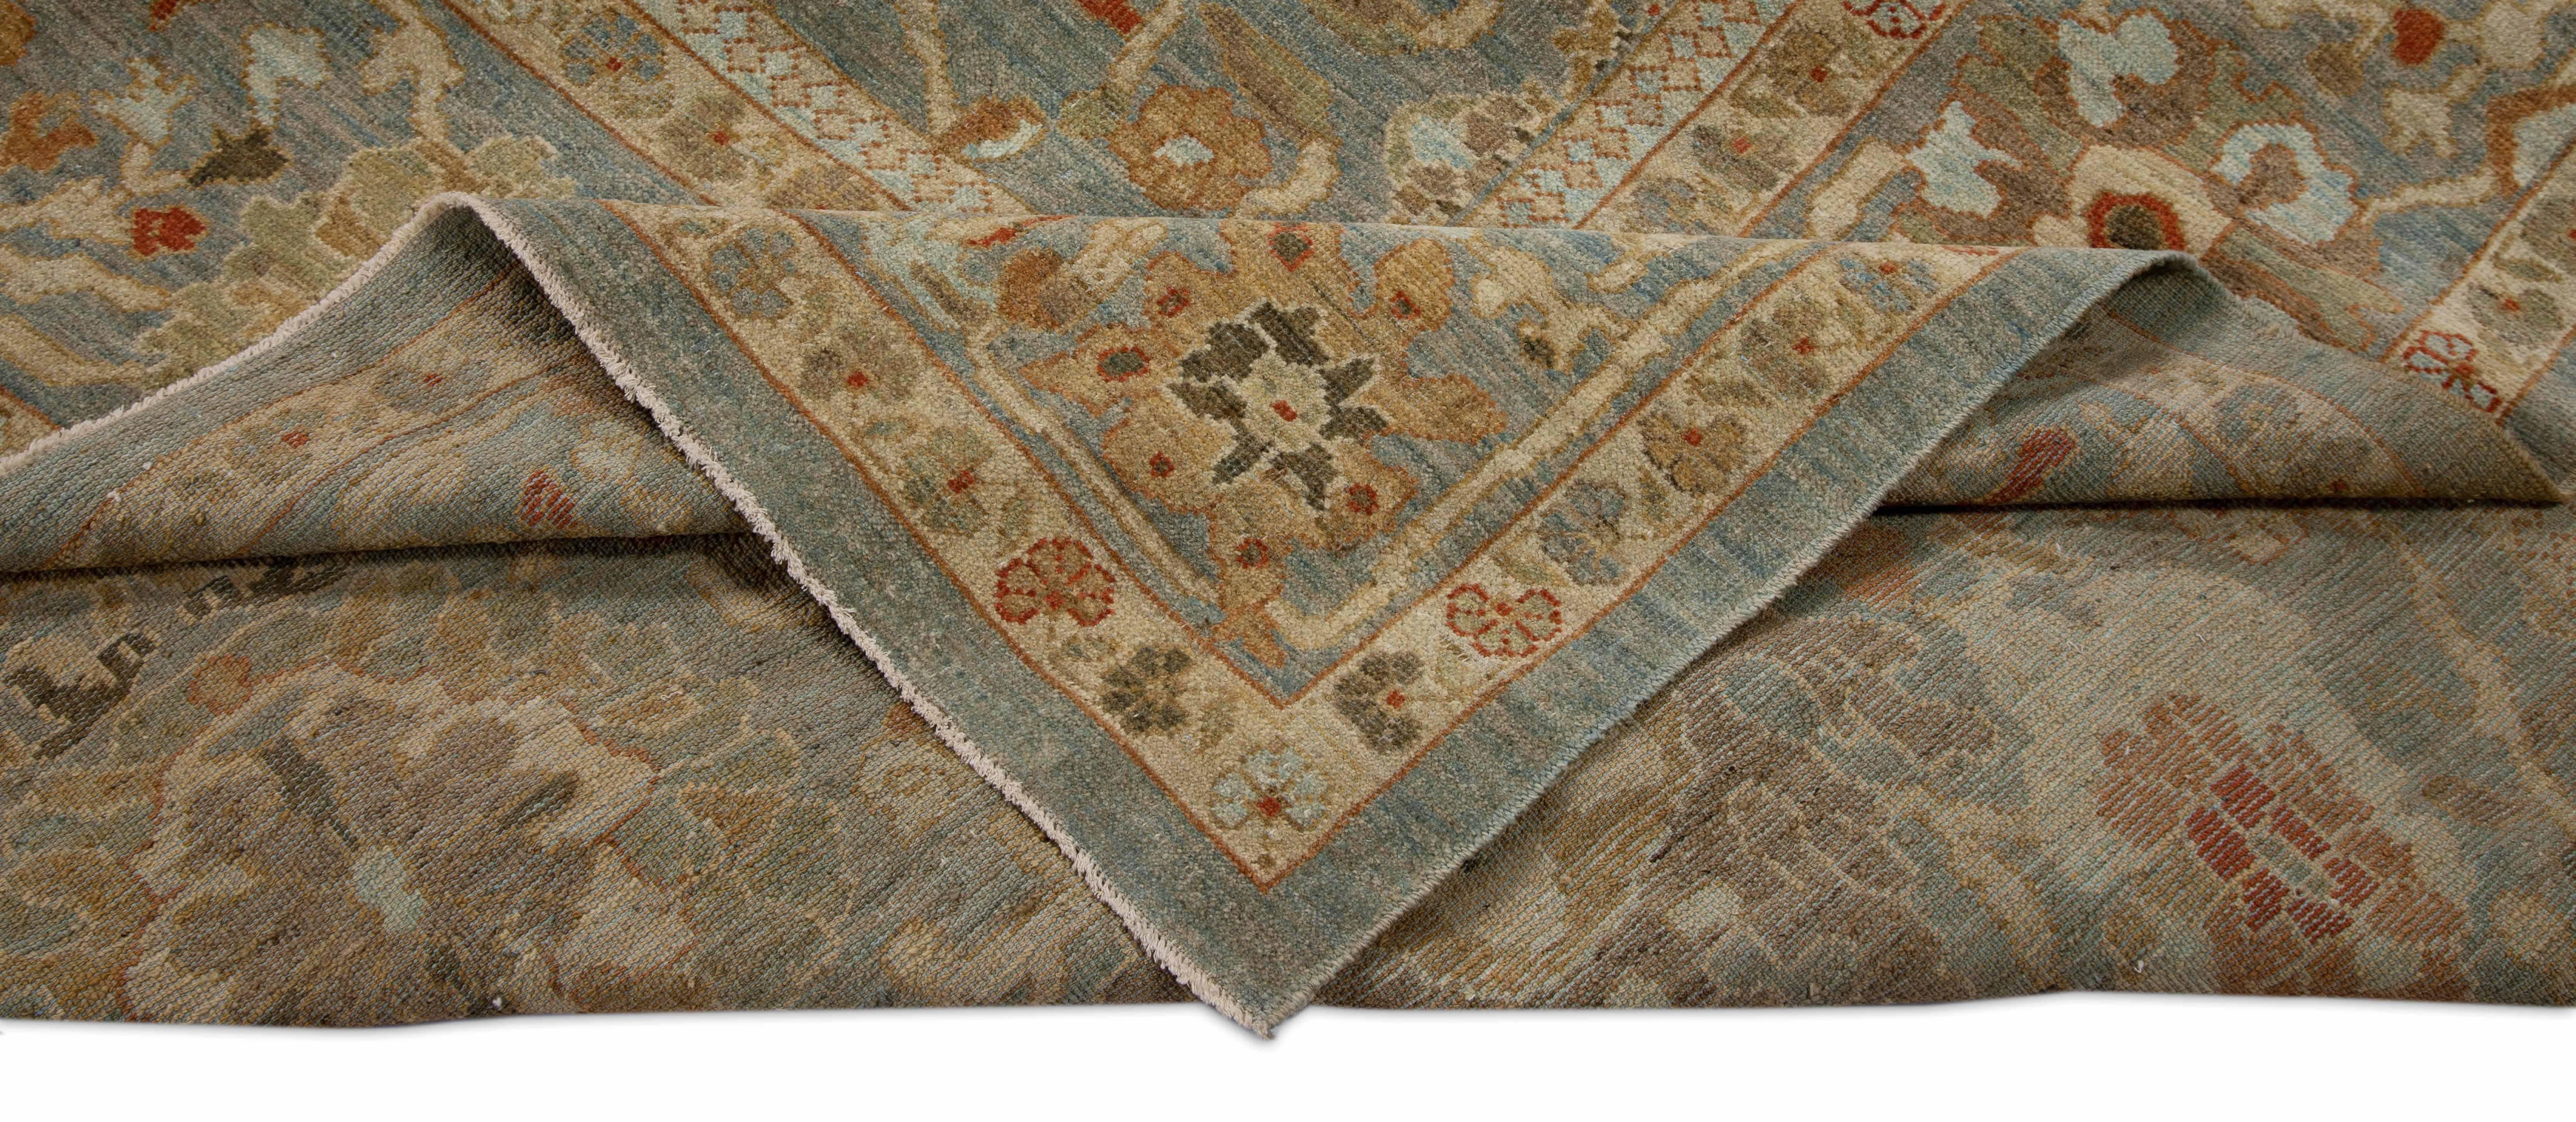 Islamic Contemporary Sultanabad Rug with Blue Gray Field of Colored Flower Detail For Sale